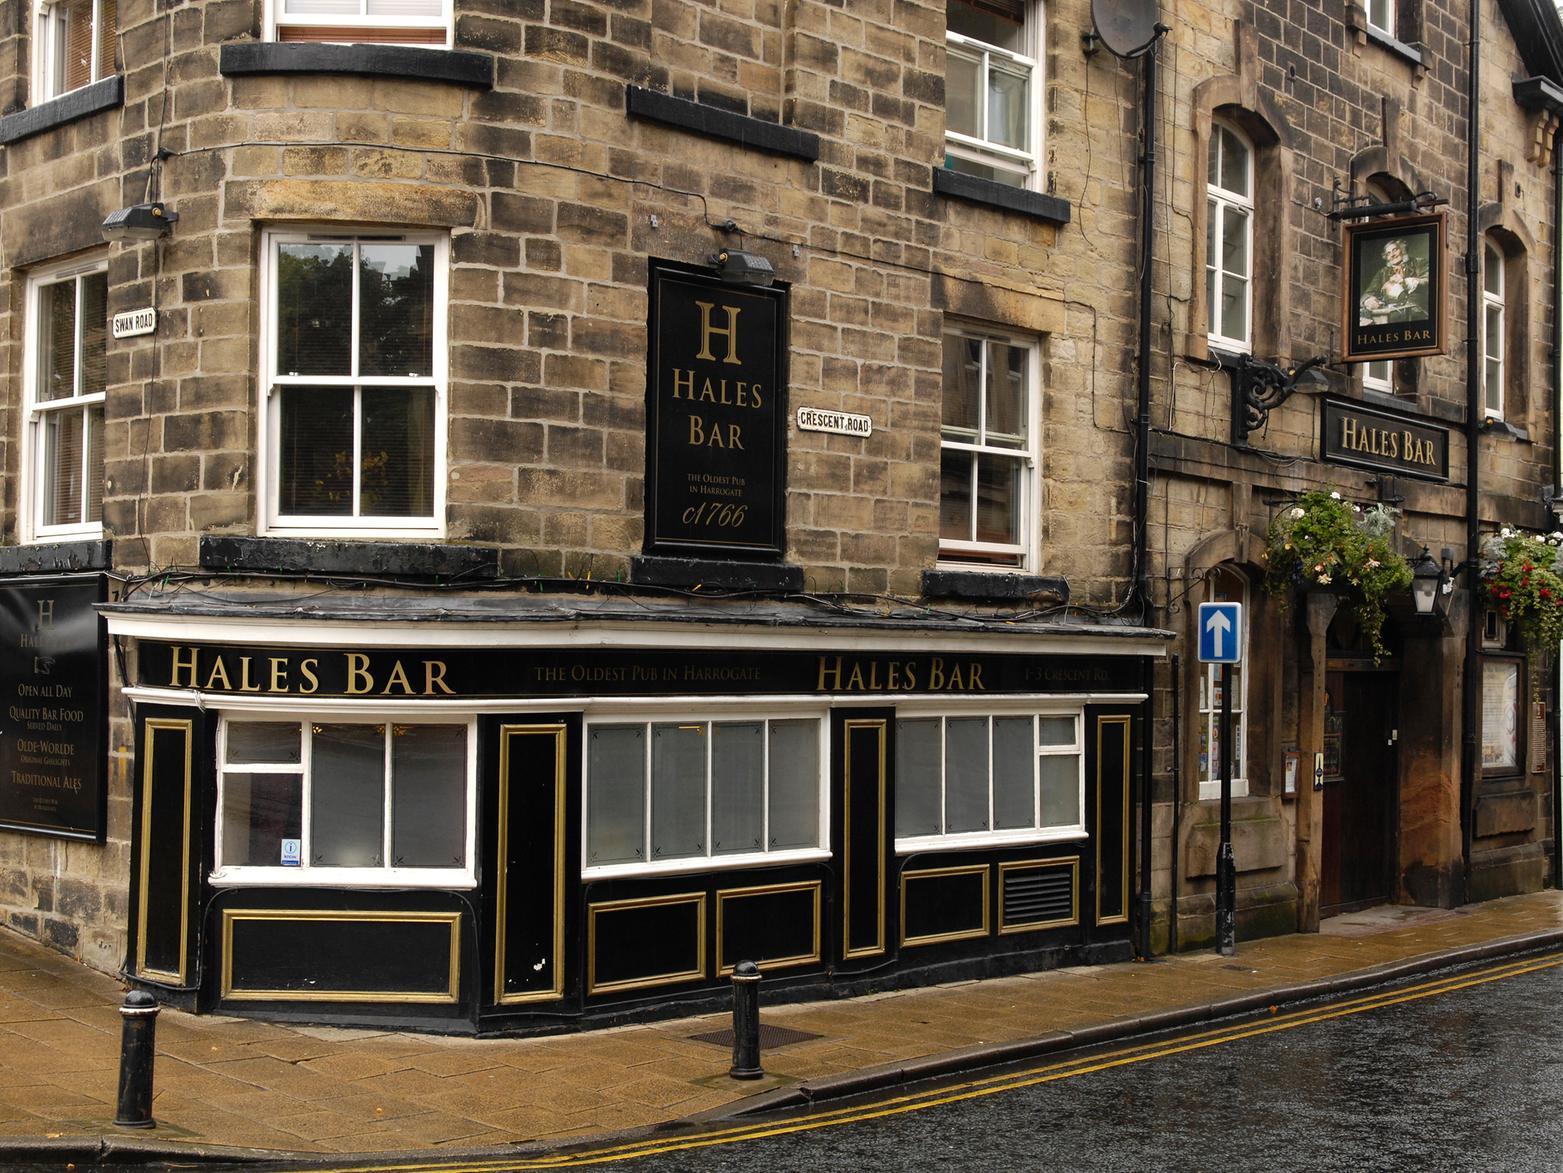 Hales Bar is the oldest licensed premises in Harrogate. It is an old coaching inn and founded in the mid-17th century.
For the most part, it exhibits ghostly manifestations. these include poltergeists with strange sounds and manic laughter. Licensees have reported bottles and glasses falling off the shelves, spin and drop. However, never smash. Customers have witnessed shadows walking through the bar. When it was investigated by a paranormal team, the static camera caught a black shape floating down behind an internal door. The light on the camera adjusted itself to it.